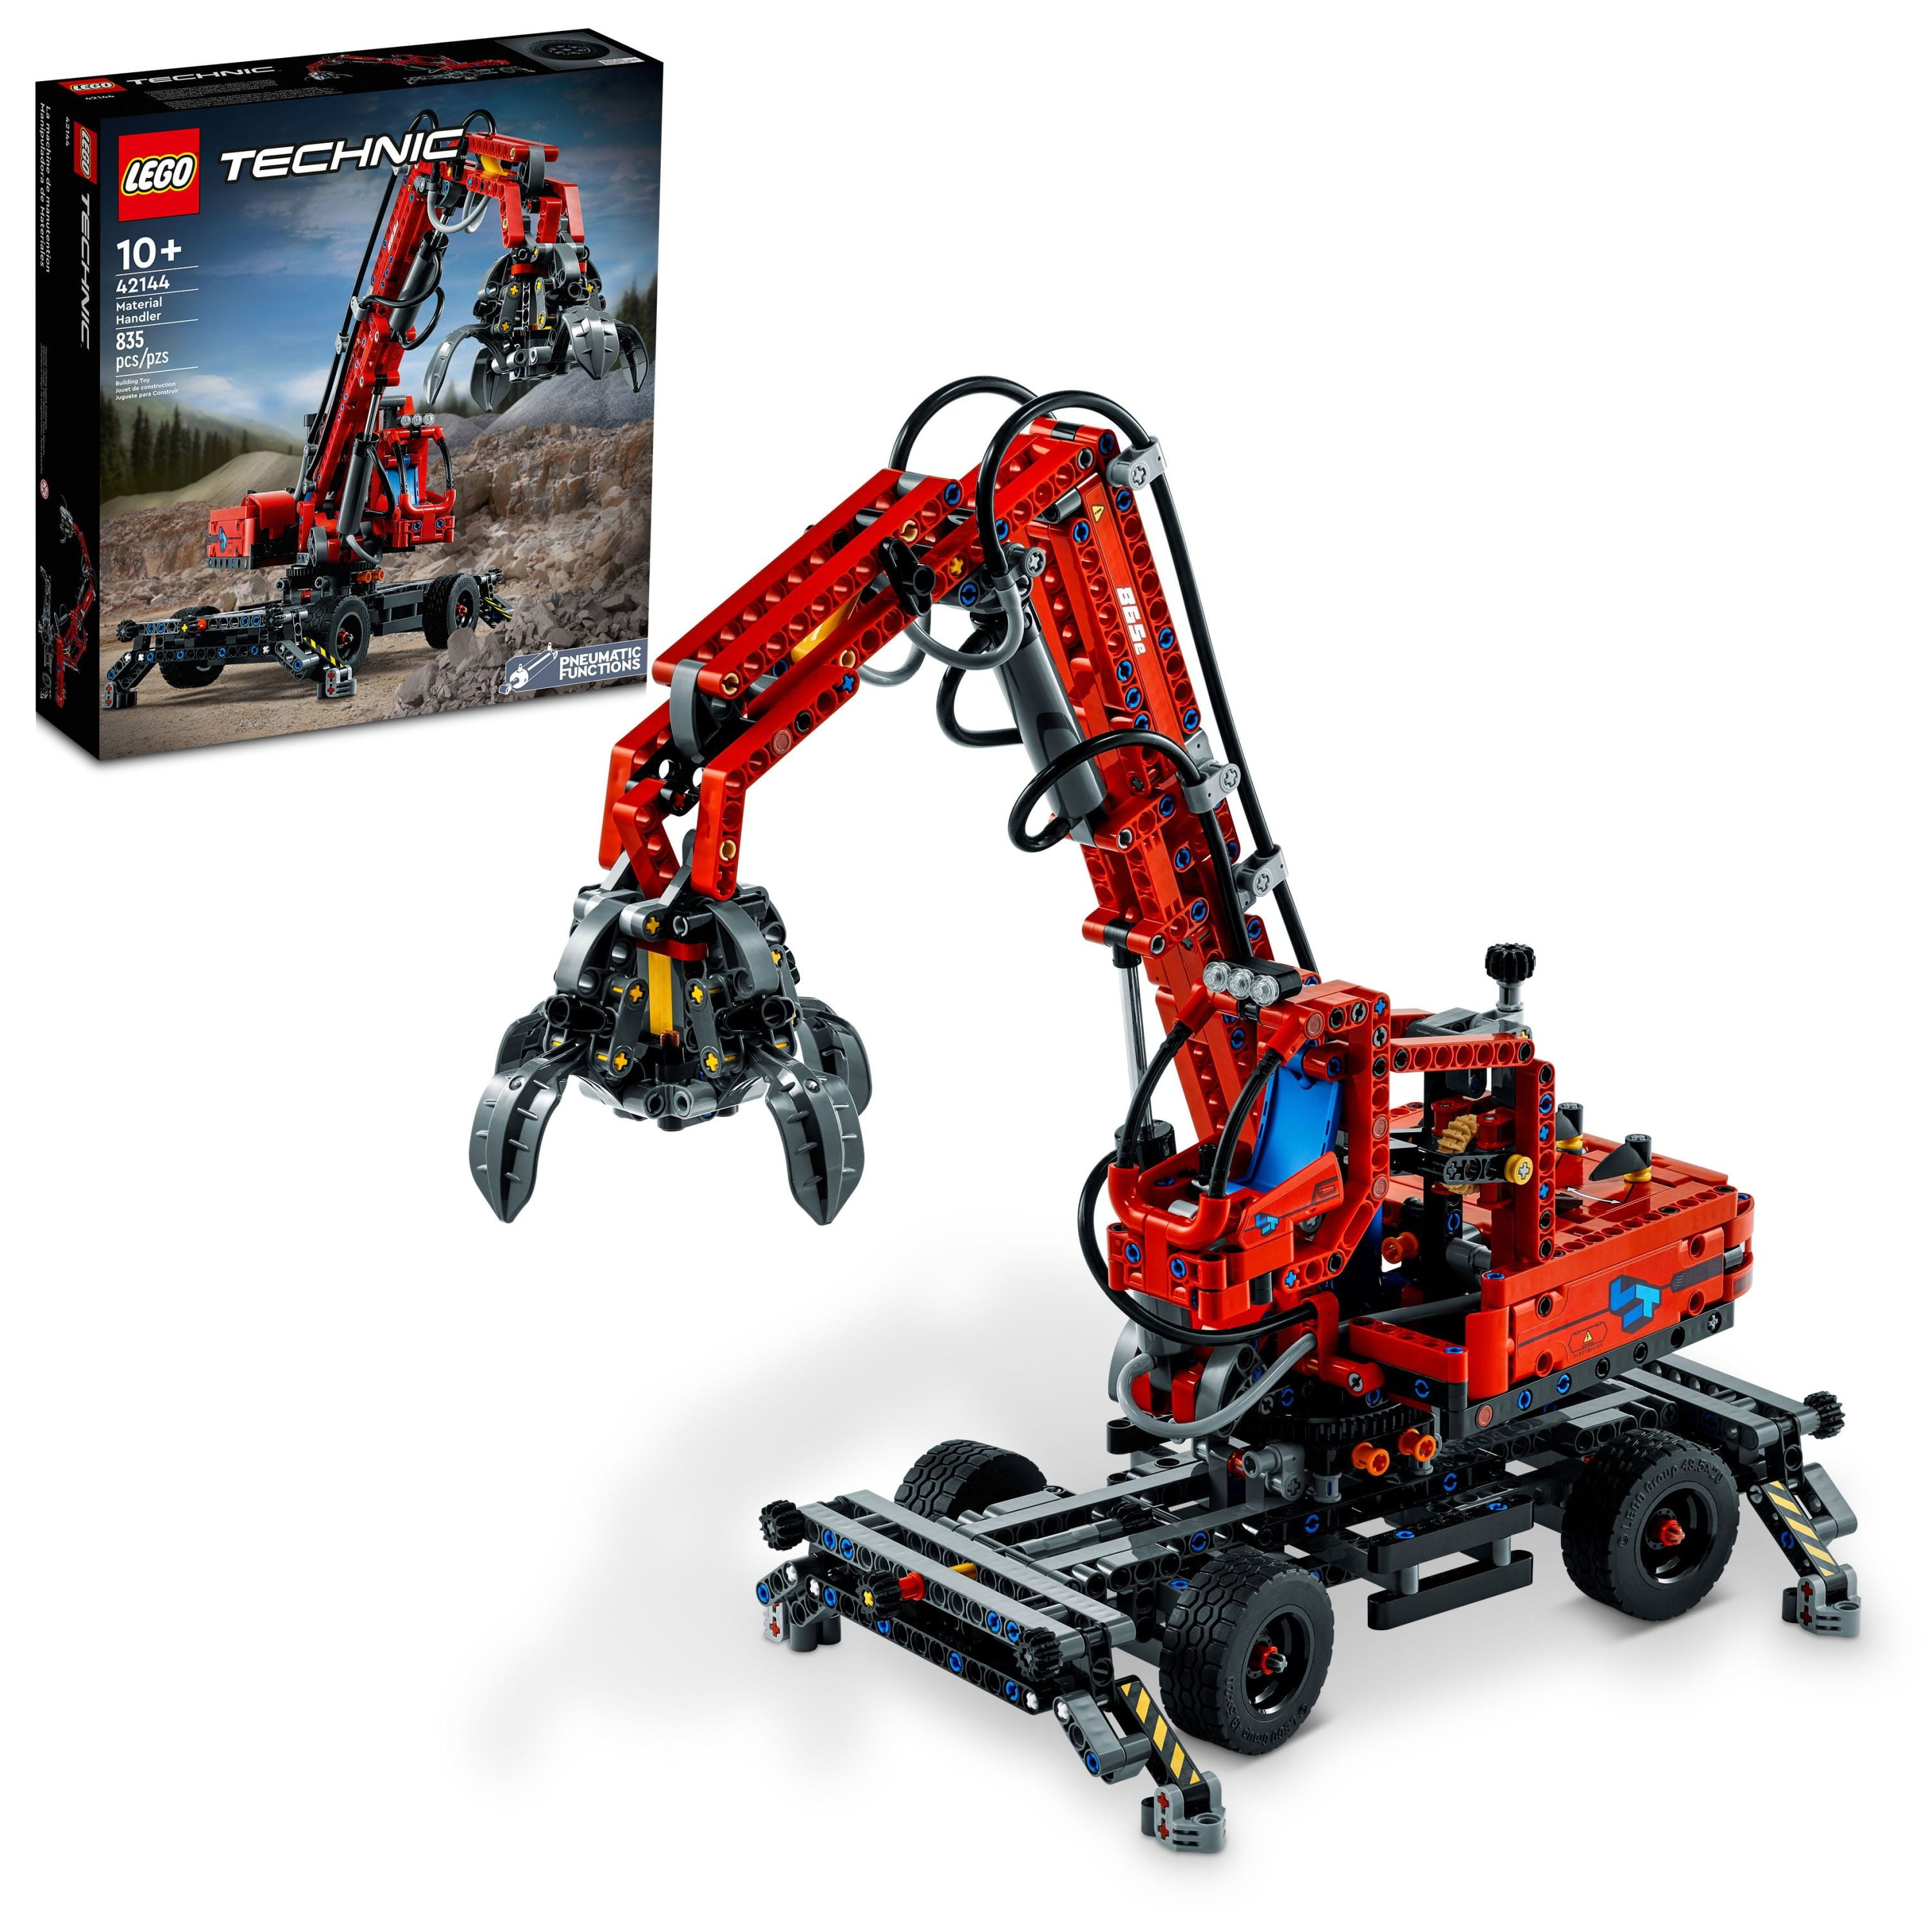 LEGO Technic Material Handler 42144, Mechanical Model Crane Toy, with Manual and Pneumatic Functions, Construction Truck Building Educational Toys - Walmart.com